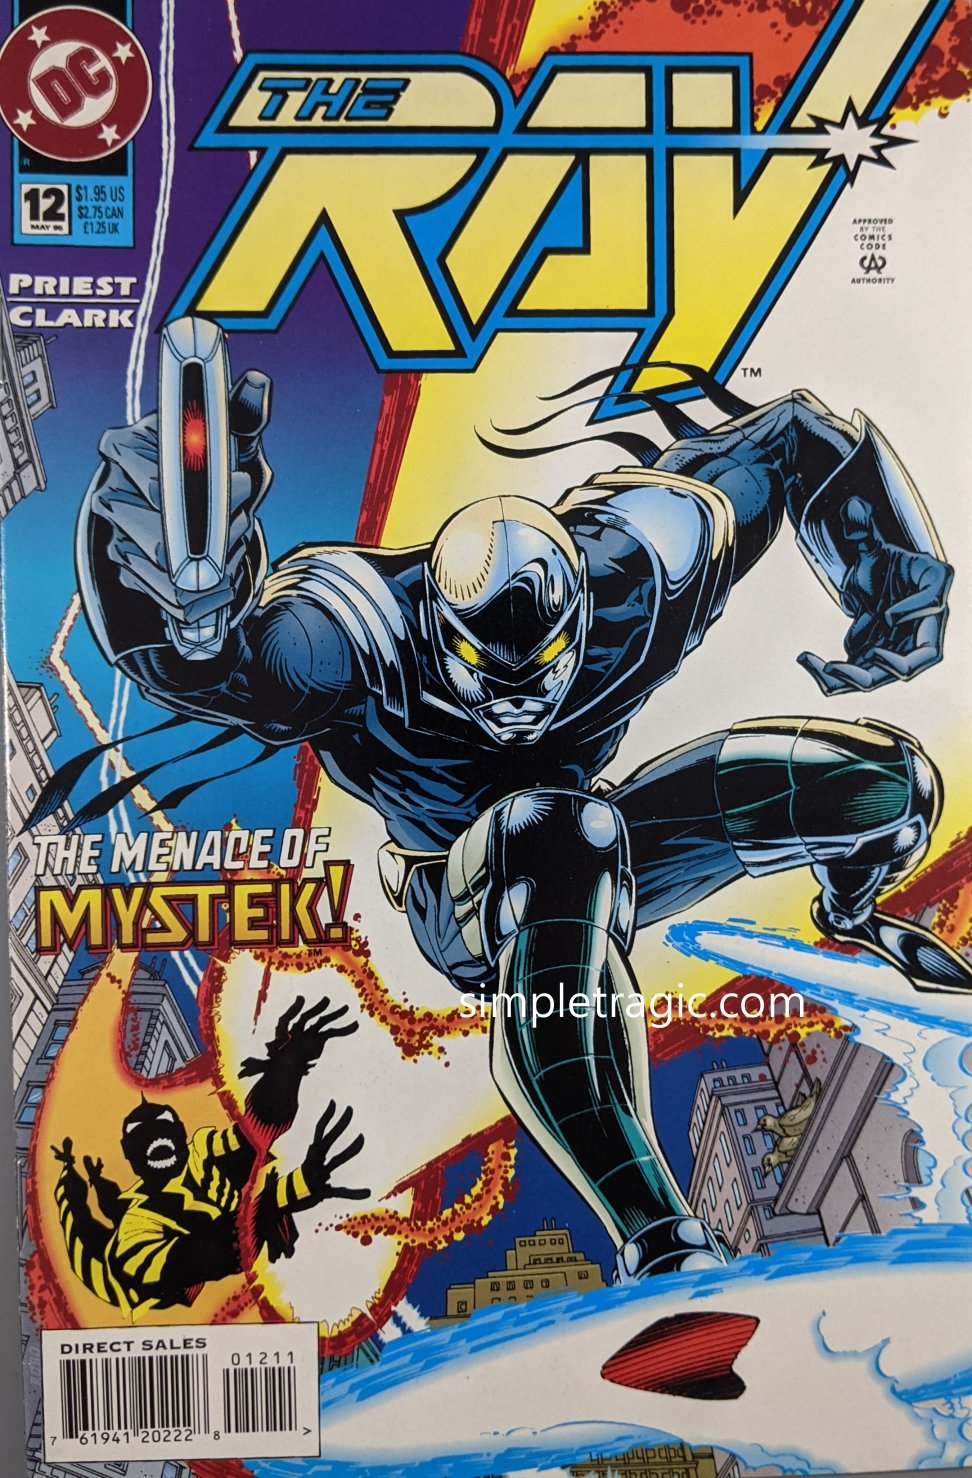 Ray, The (1994) #12